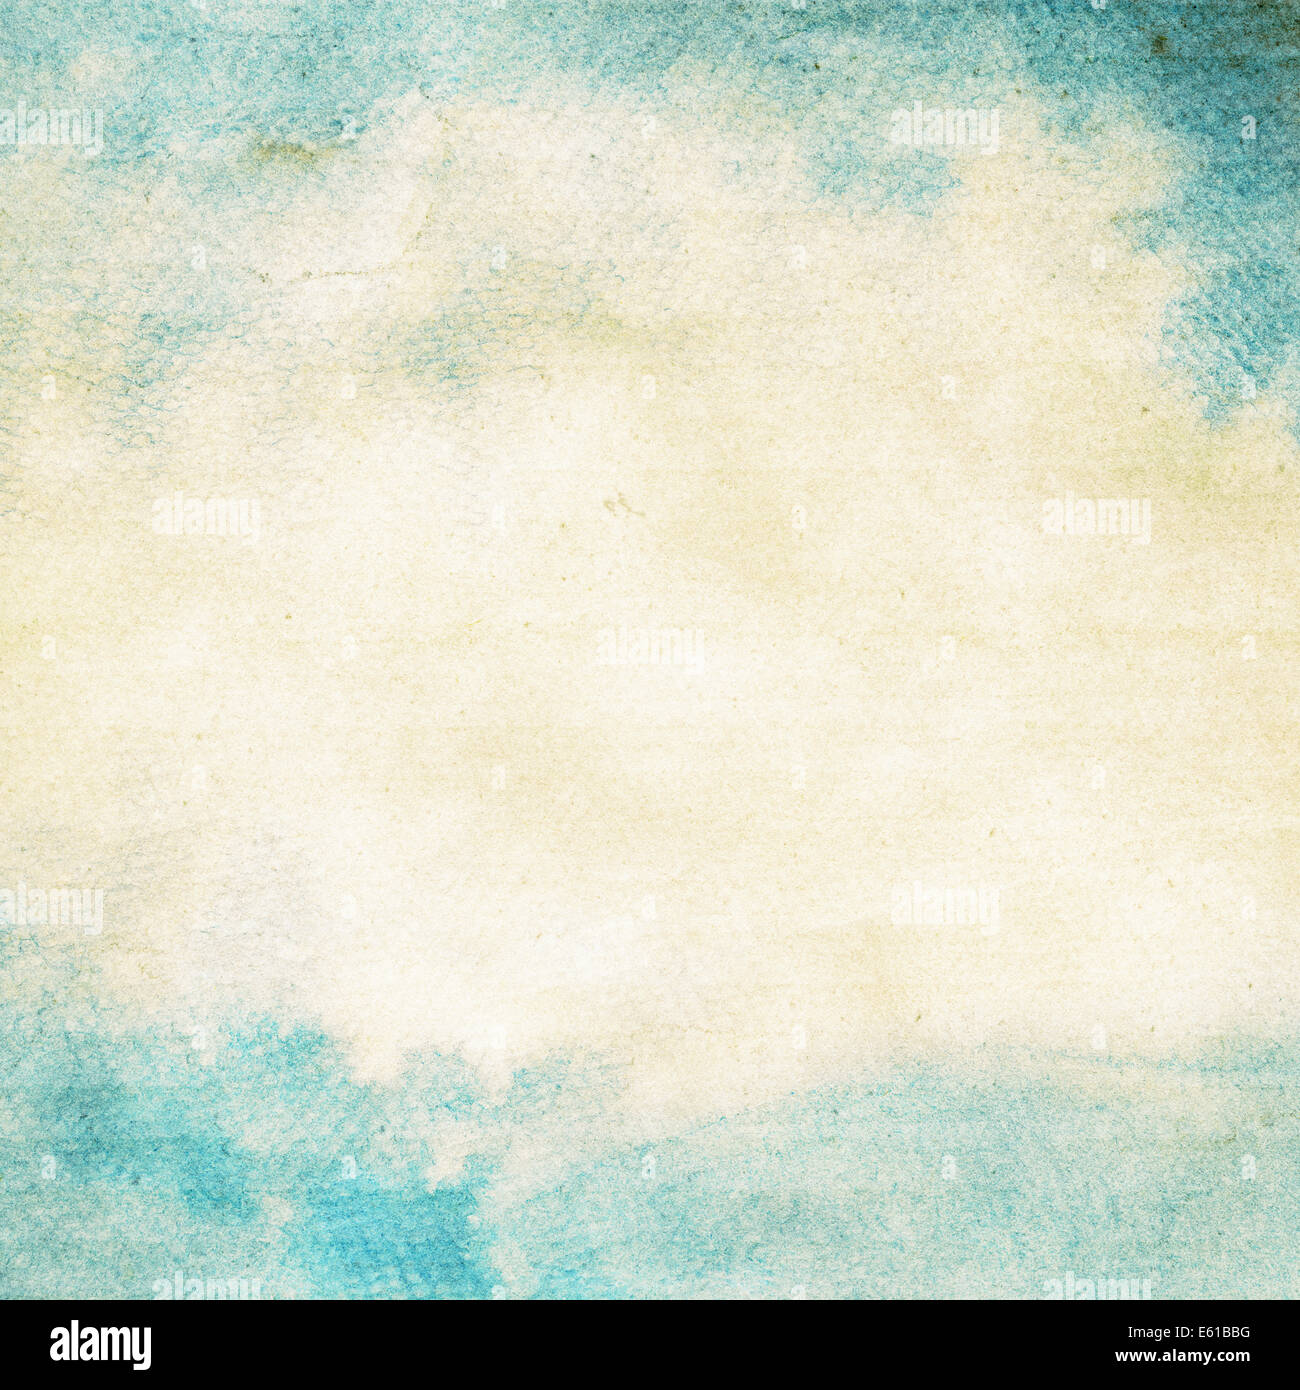 Abstract grunge watercolor background. Stock Photo